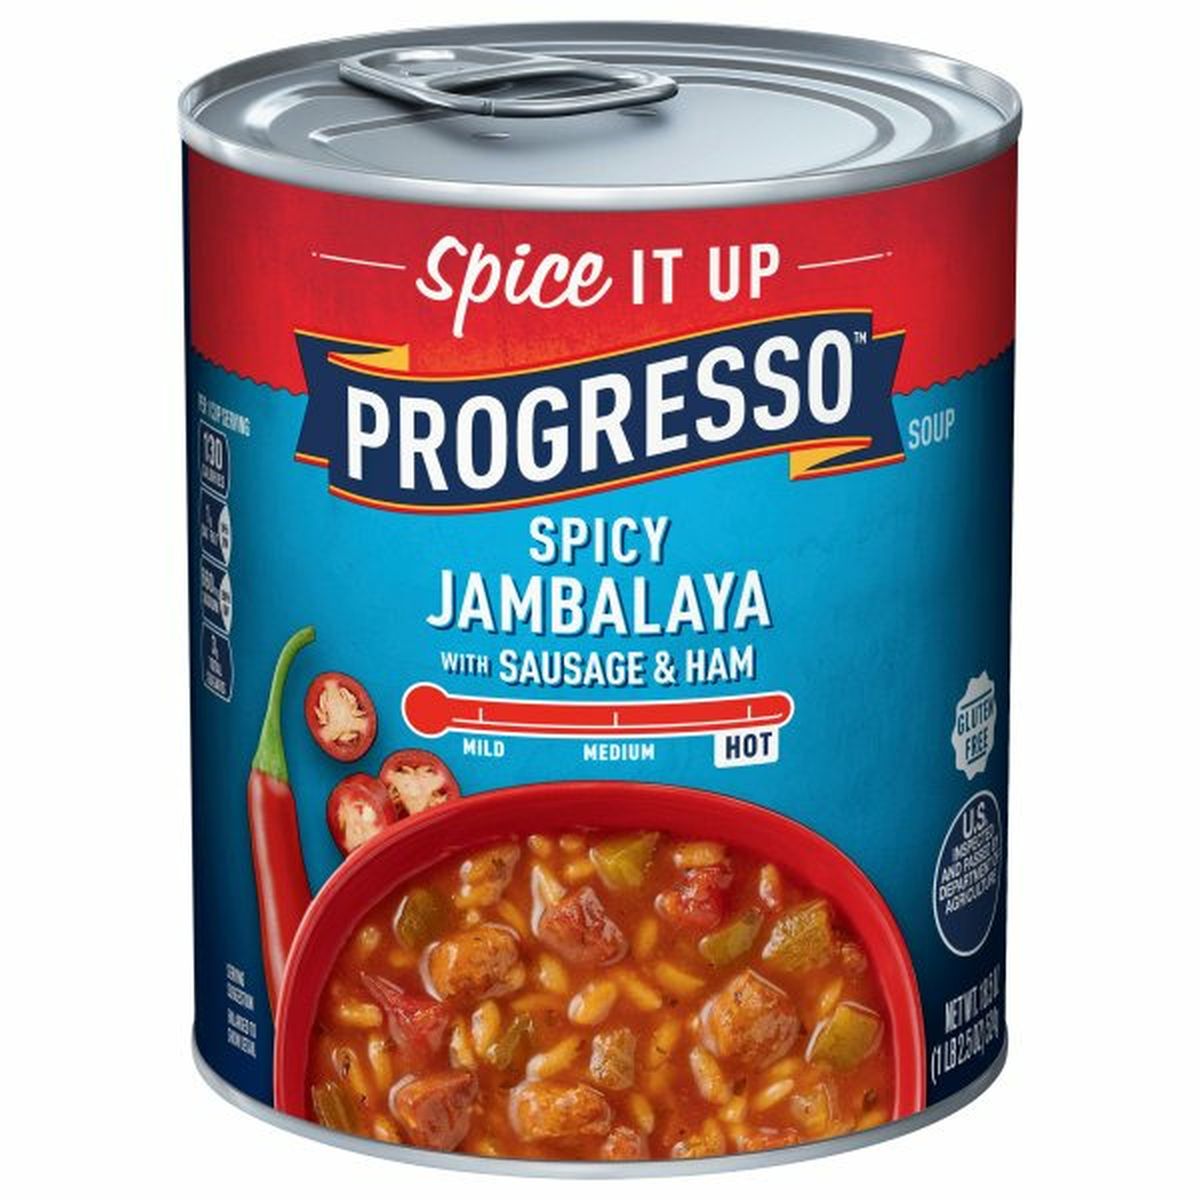 Calories in Progresso Soup, Jambalaya with Sausage & Ham, Spicy